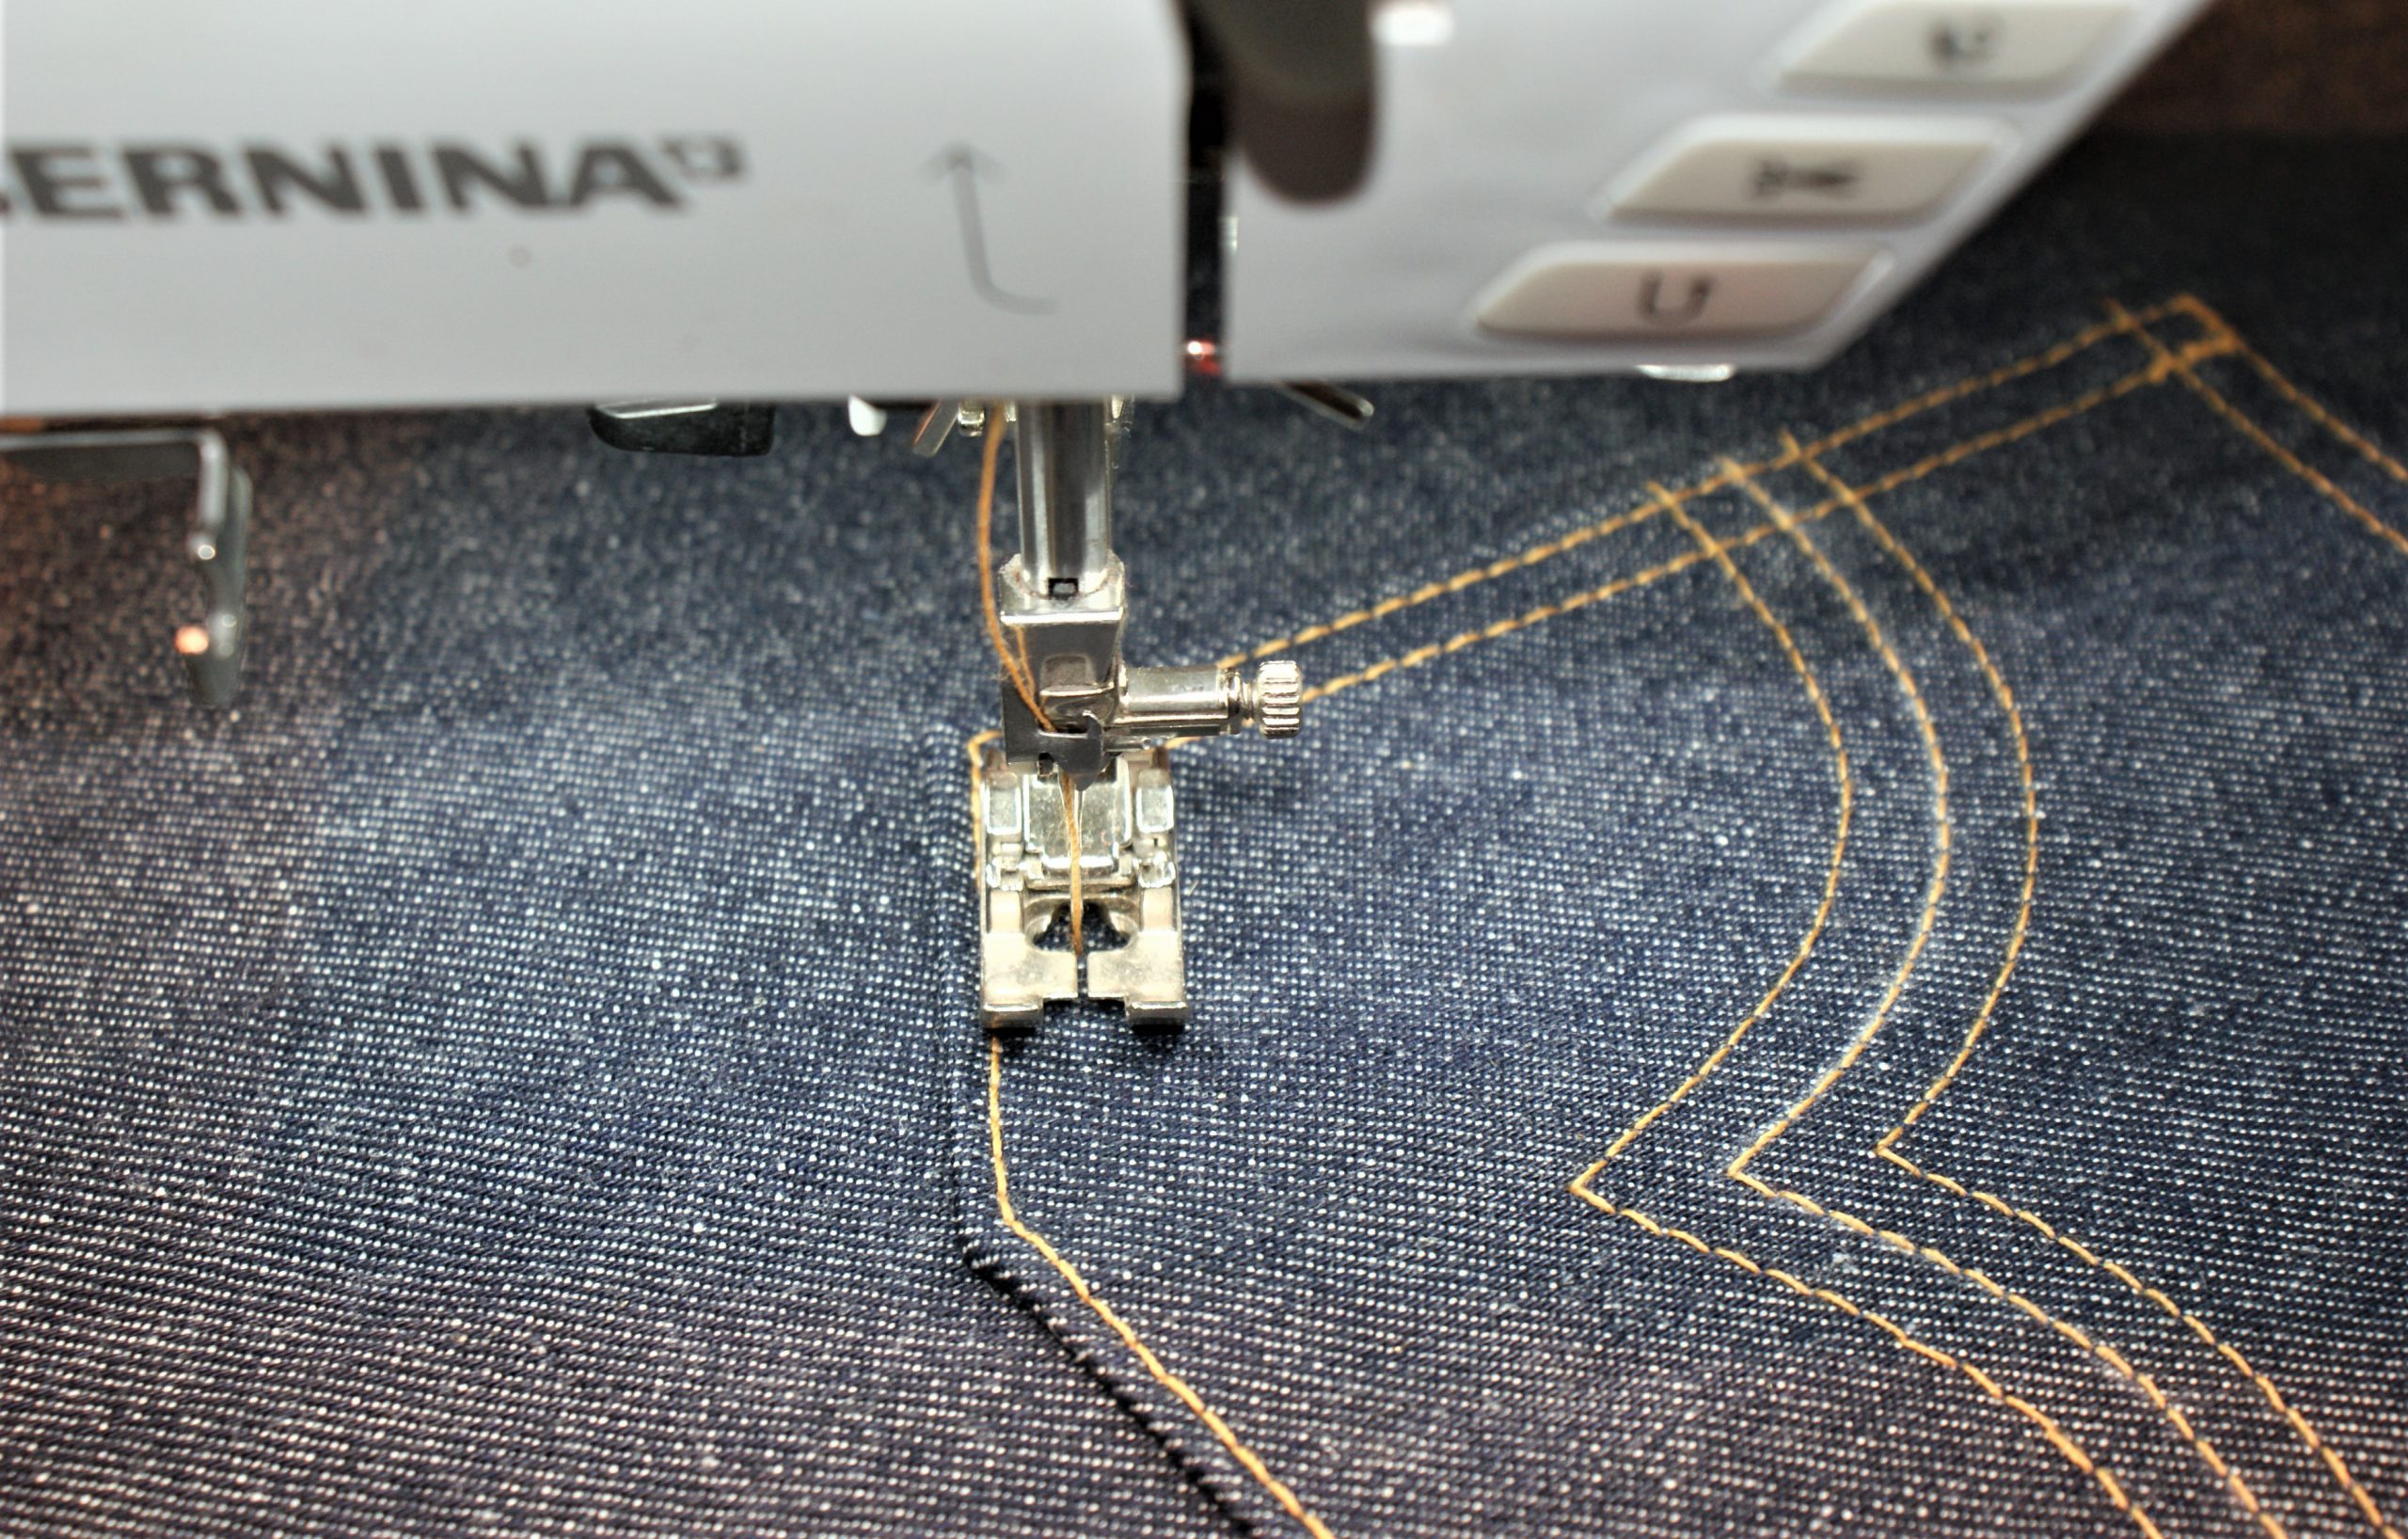 Sew a jeans pocket with cordonnet foot #11 Bernina